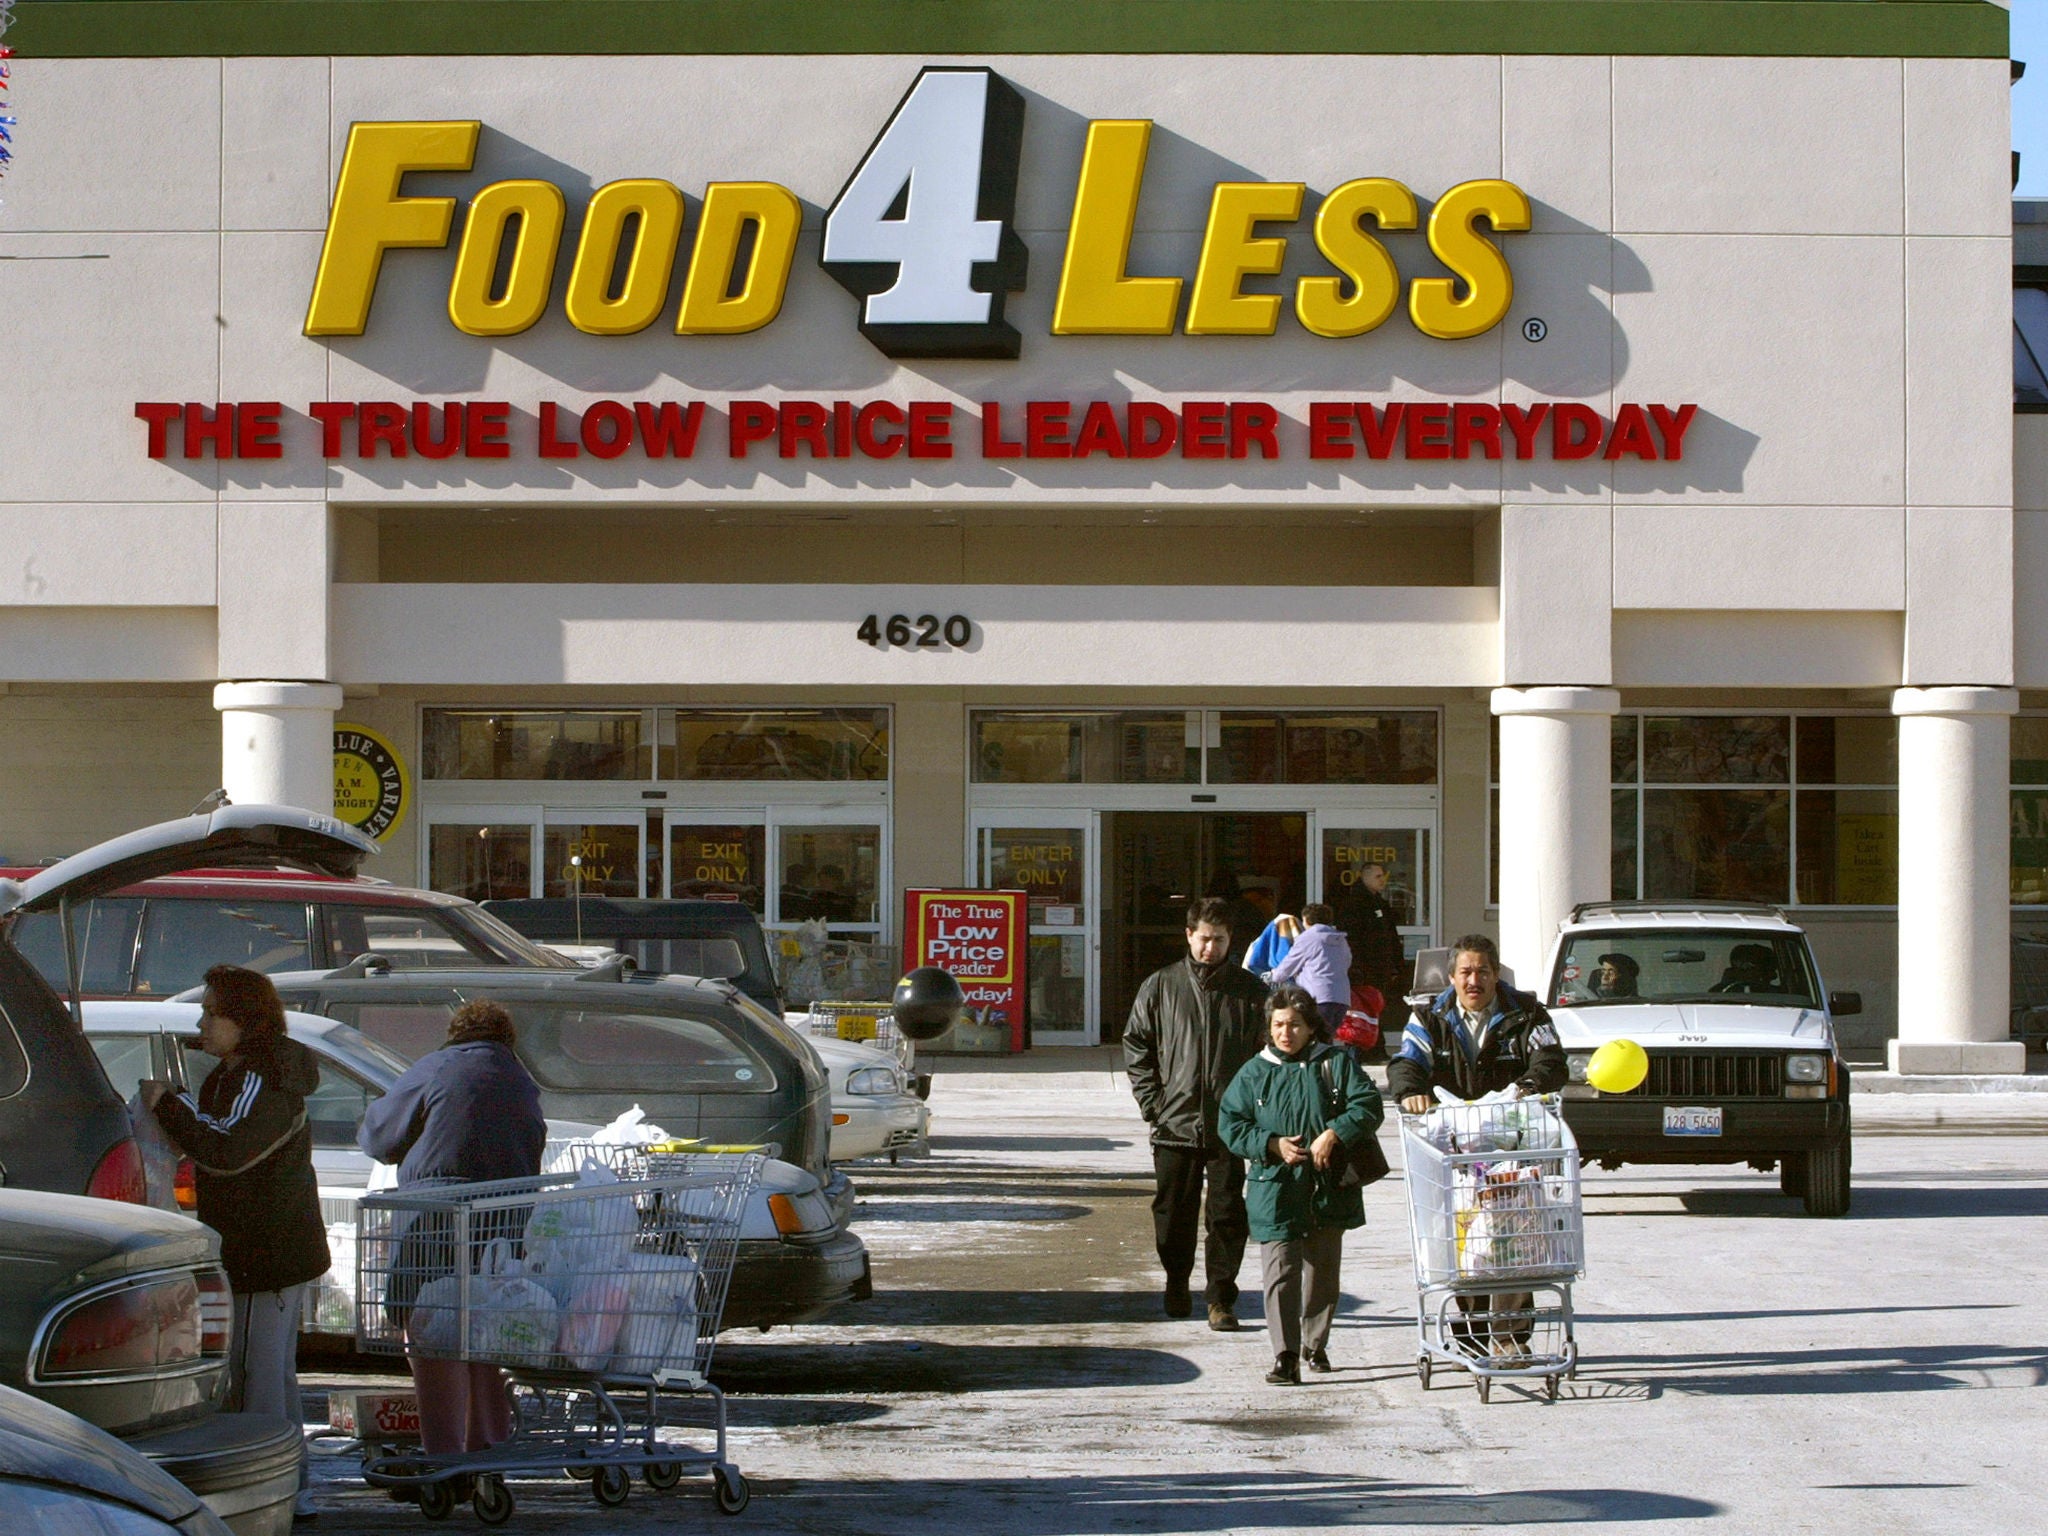 Shoppers enter a Food 4 Less, one of the chains that received mold-tainted water, in Chicago, Illinois on January 15, 2003